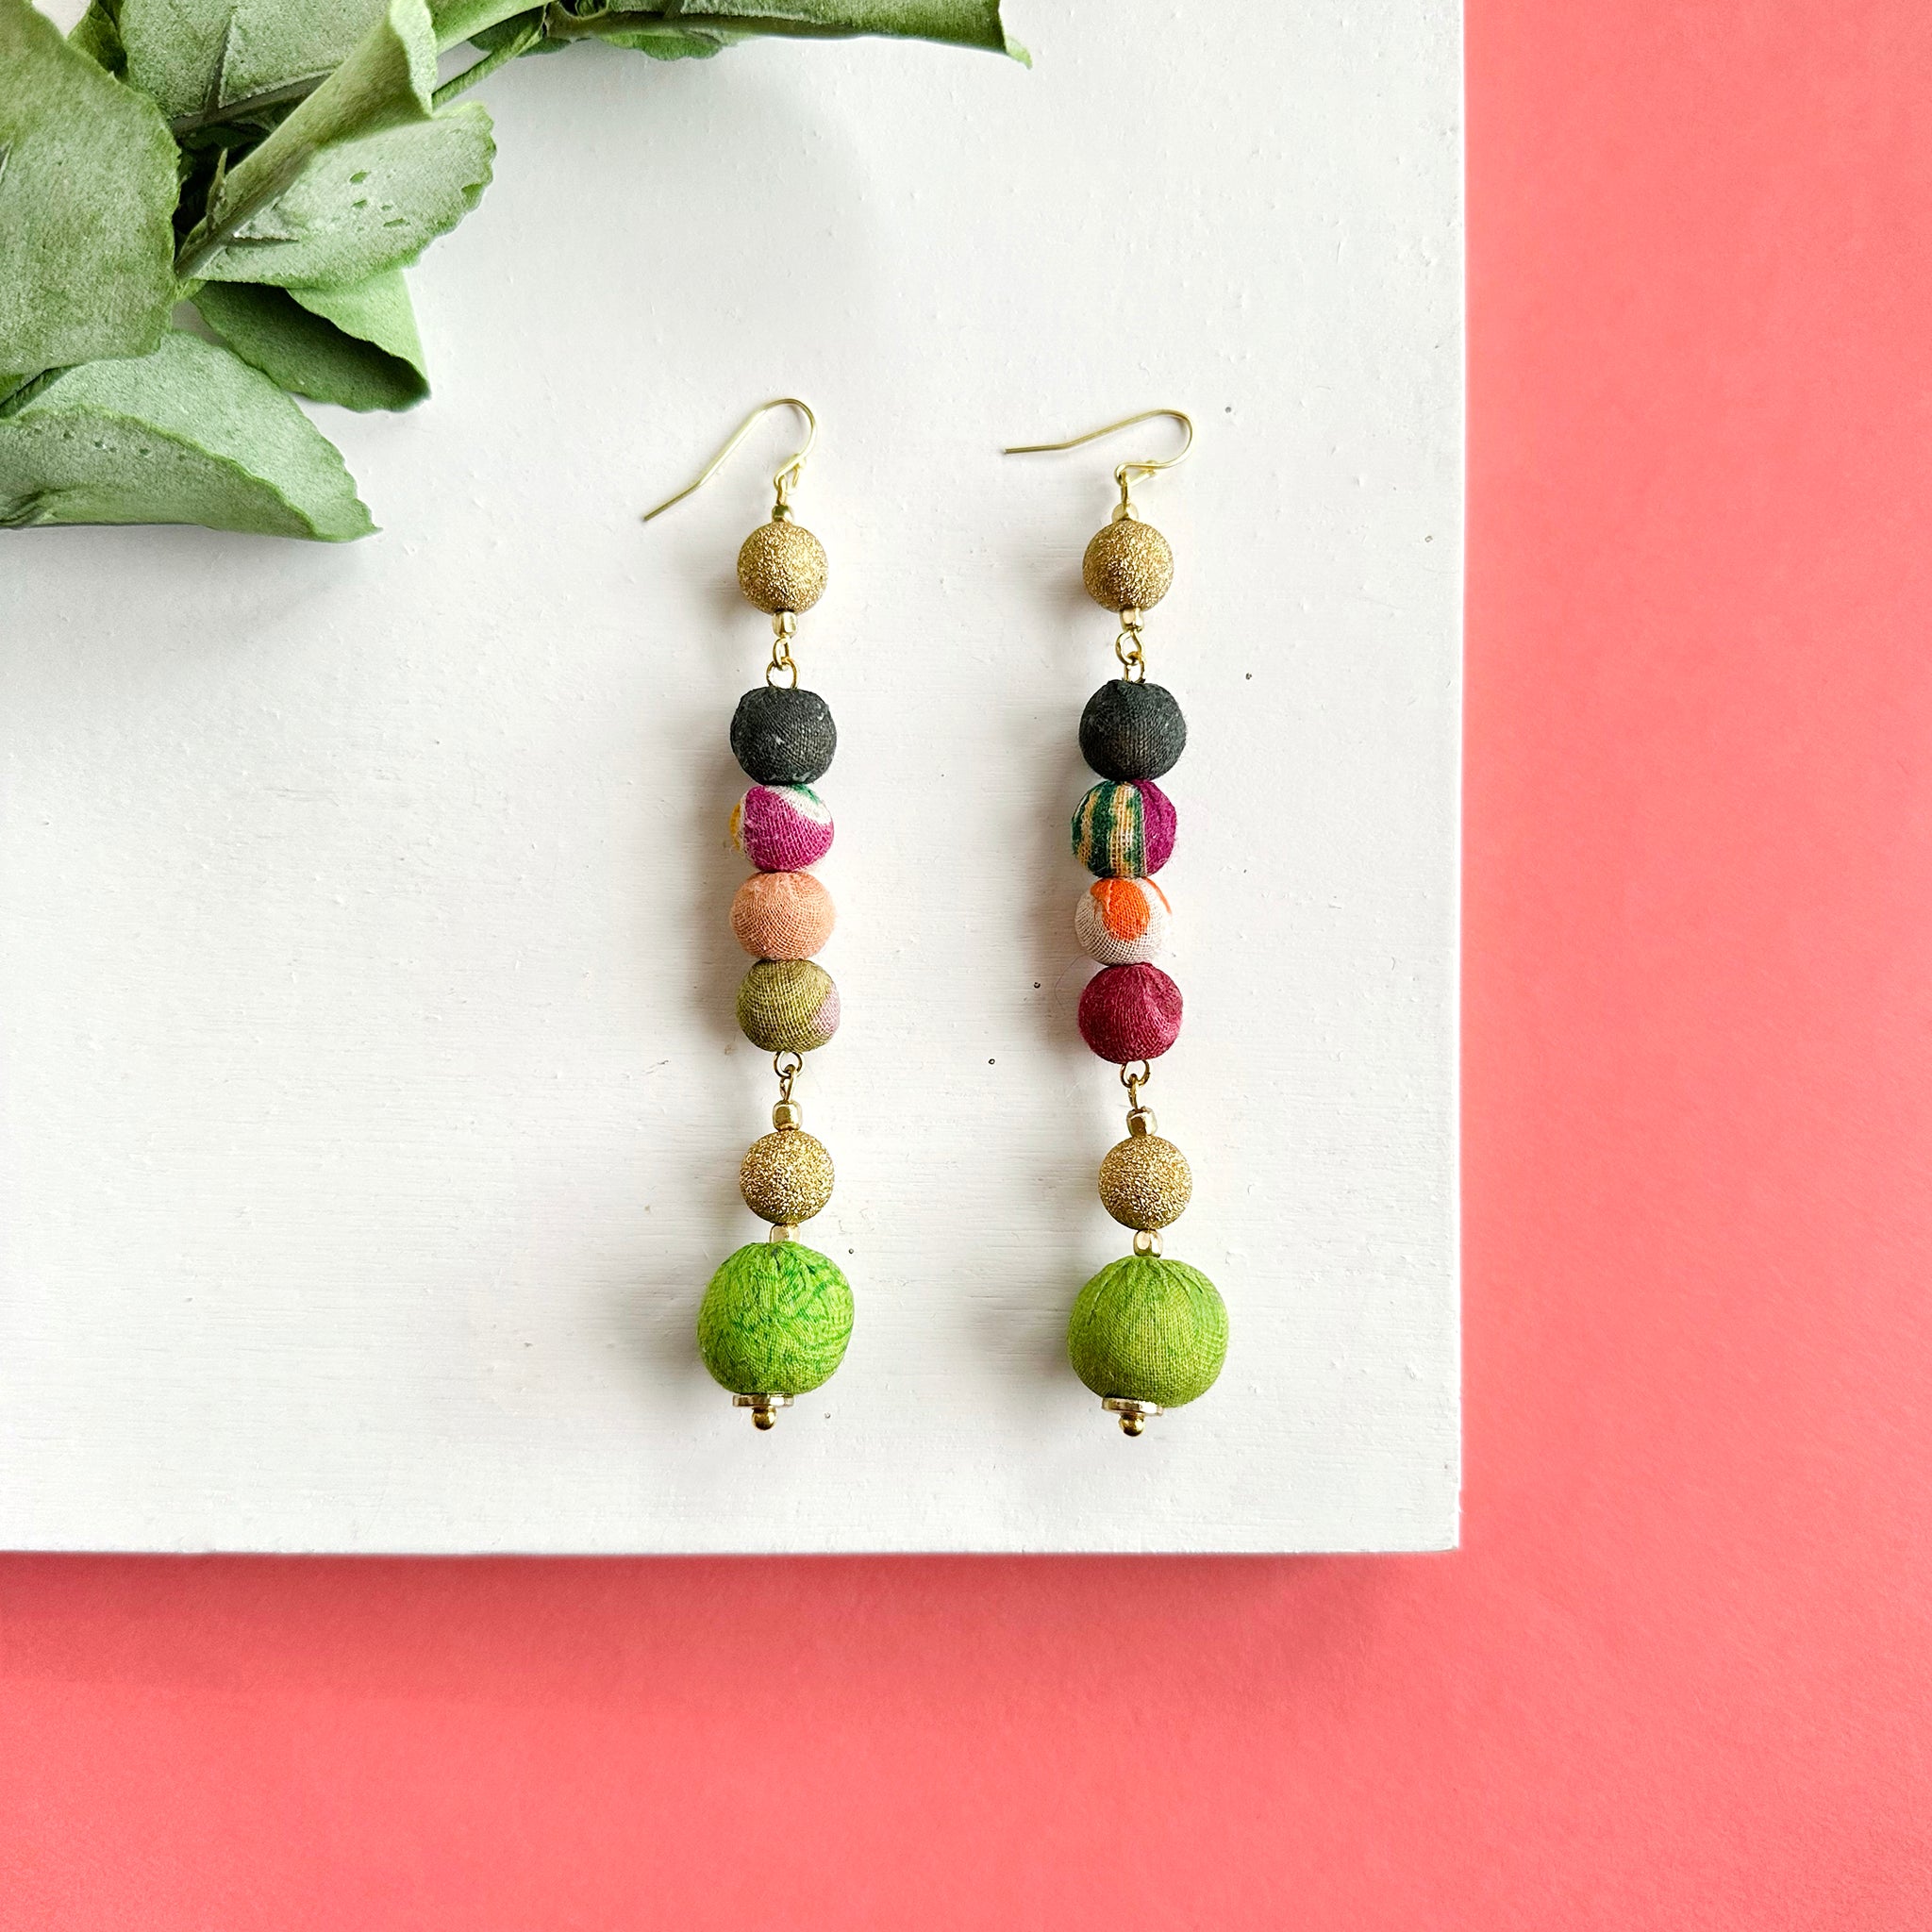 A pair of earrings is shown against a white and pink background.Two shimmering gold beads sit atop a stack of 4 colorful Kantha beads and a larger anchor bead.